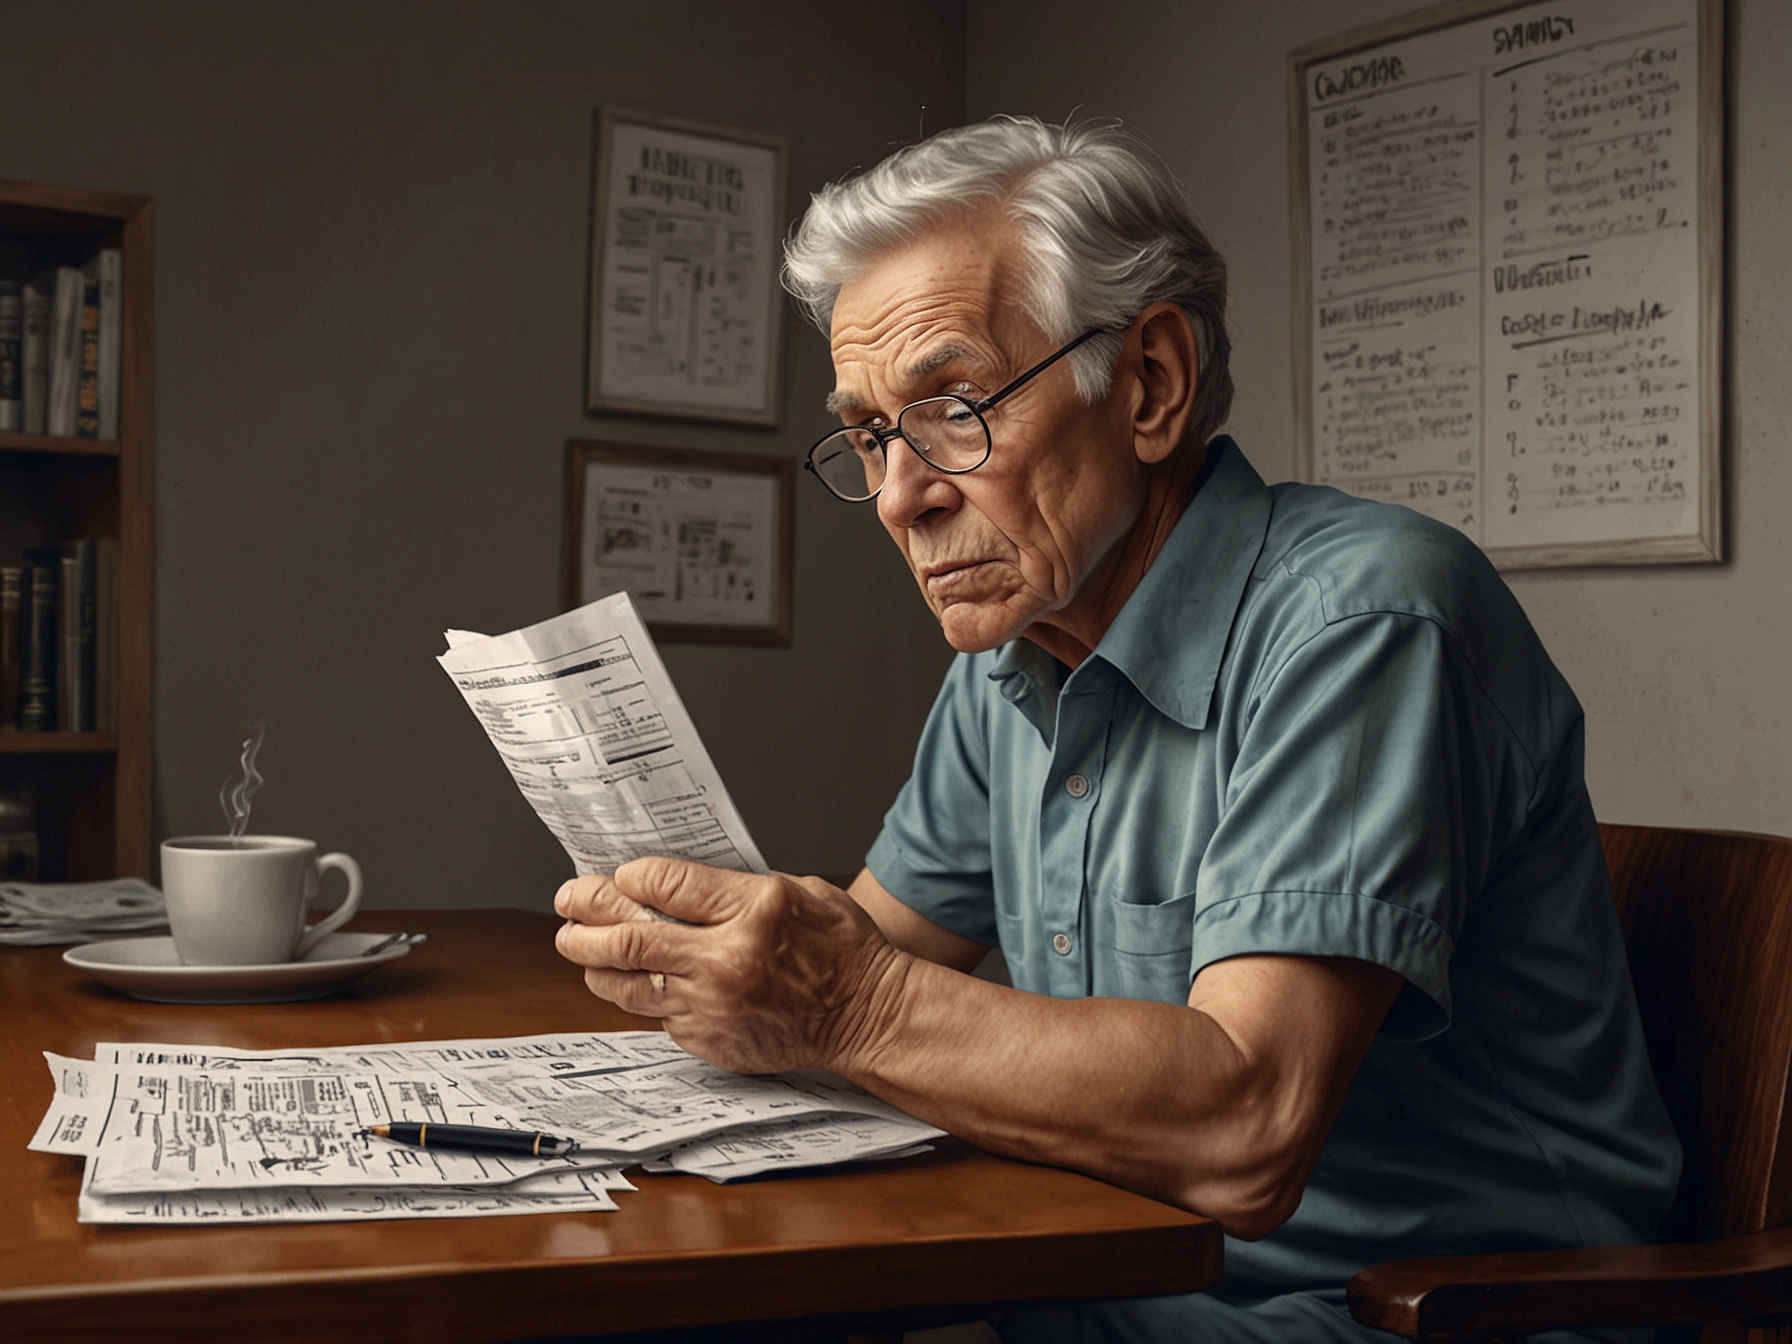 An elderly person looking at medical bills and prescription costs with a concerned expression, illustrating the financial challenges seniors face despite COLA adjustments in Social Security benefits.